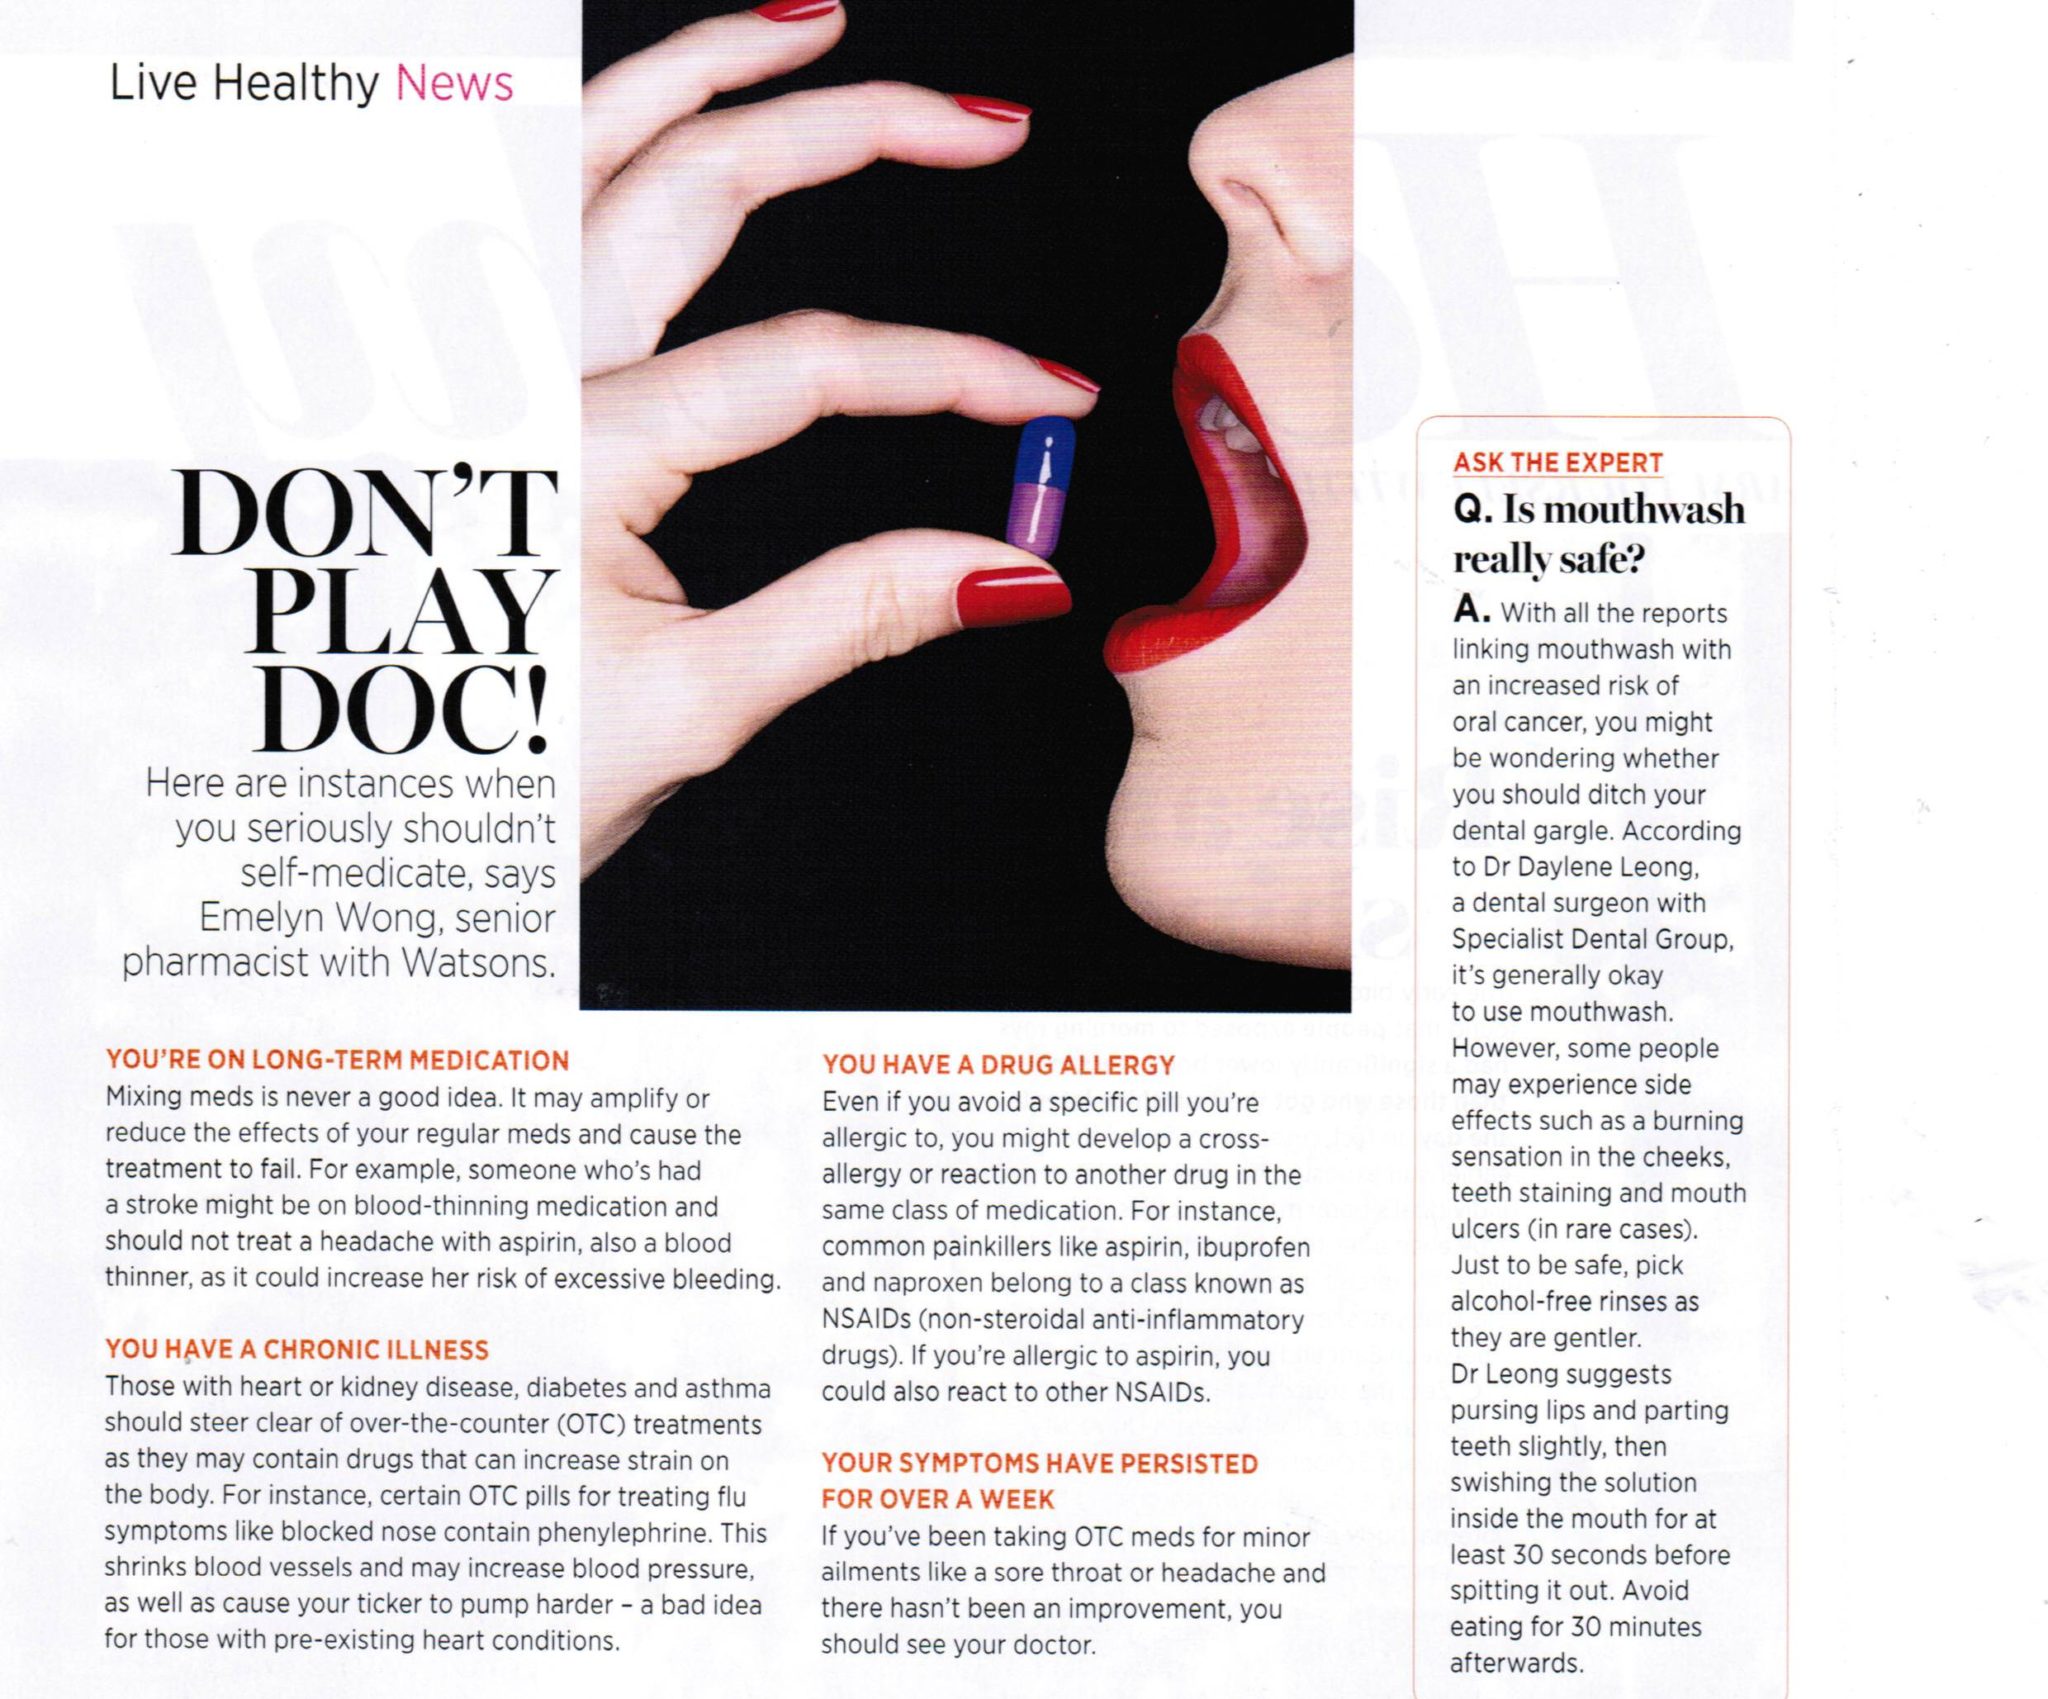 Shape Magazine, June 2014 issue: “Ask The Expert”